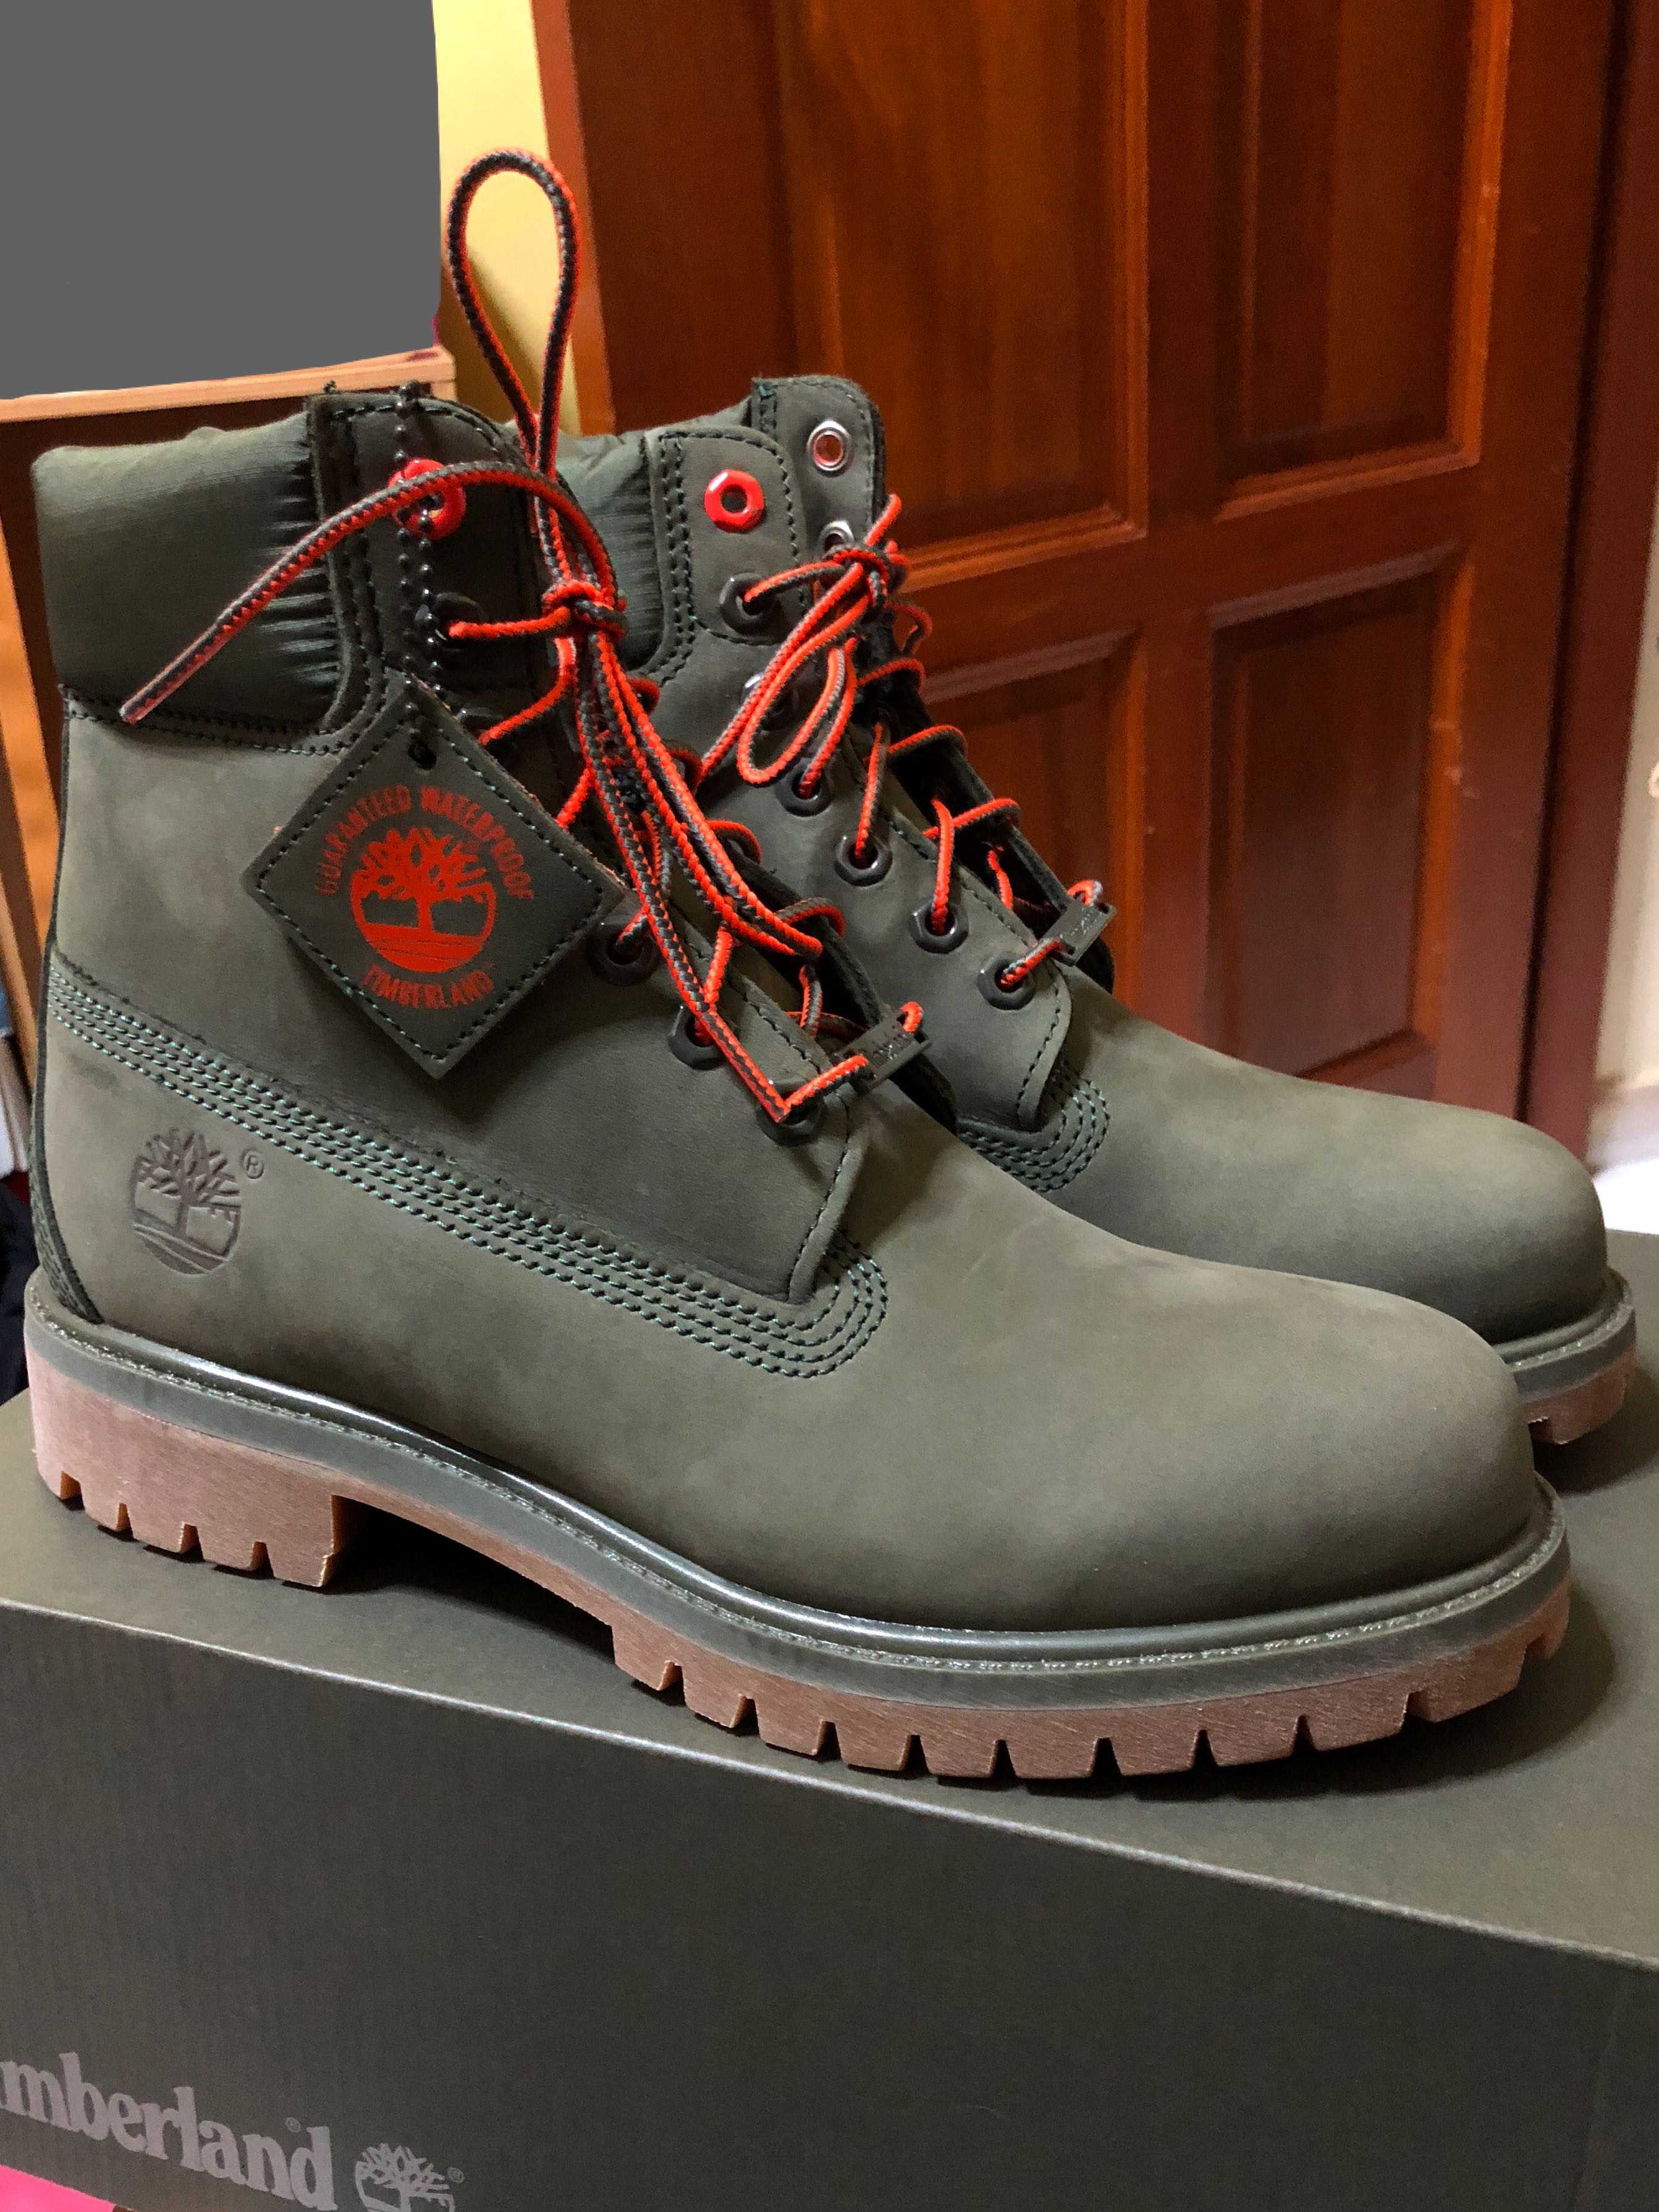 timberland boots army green